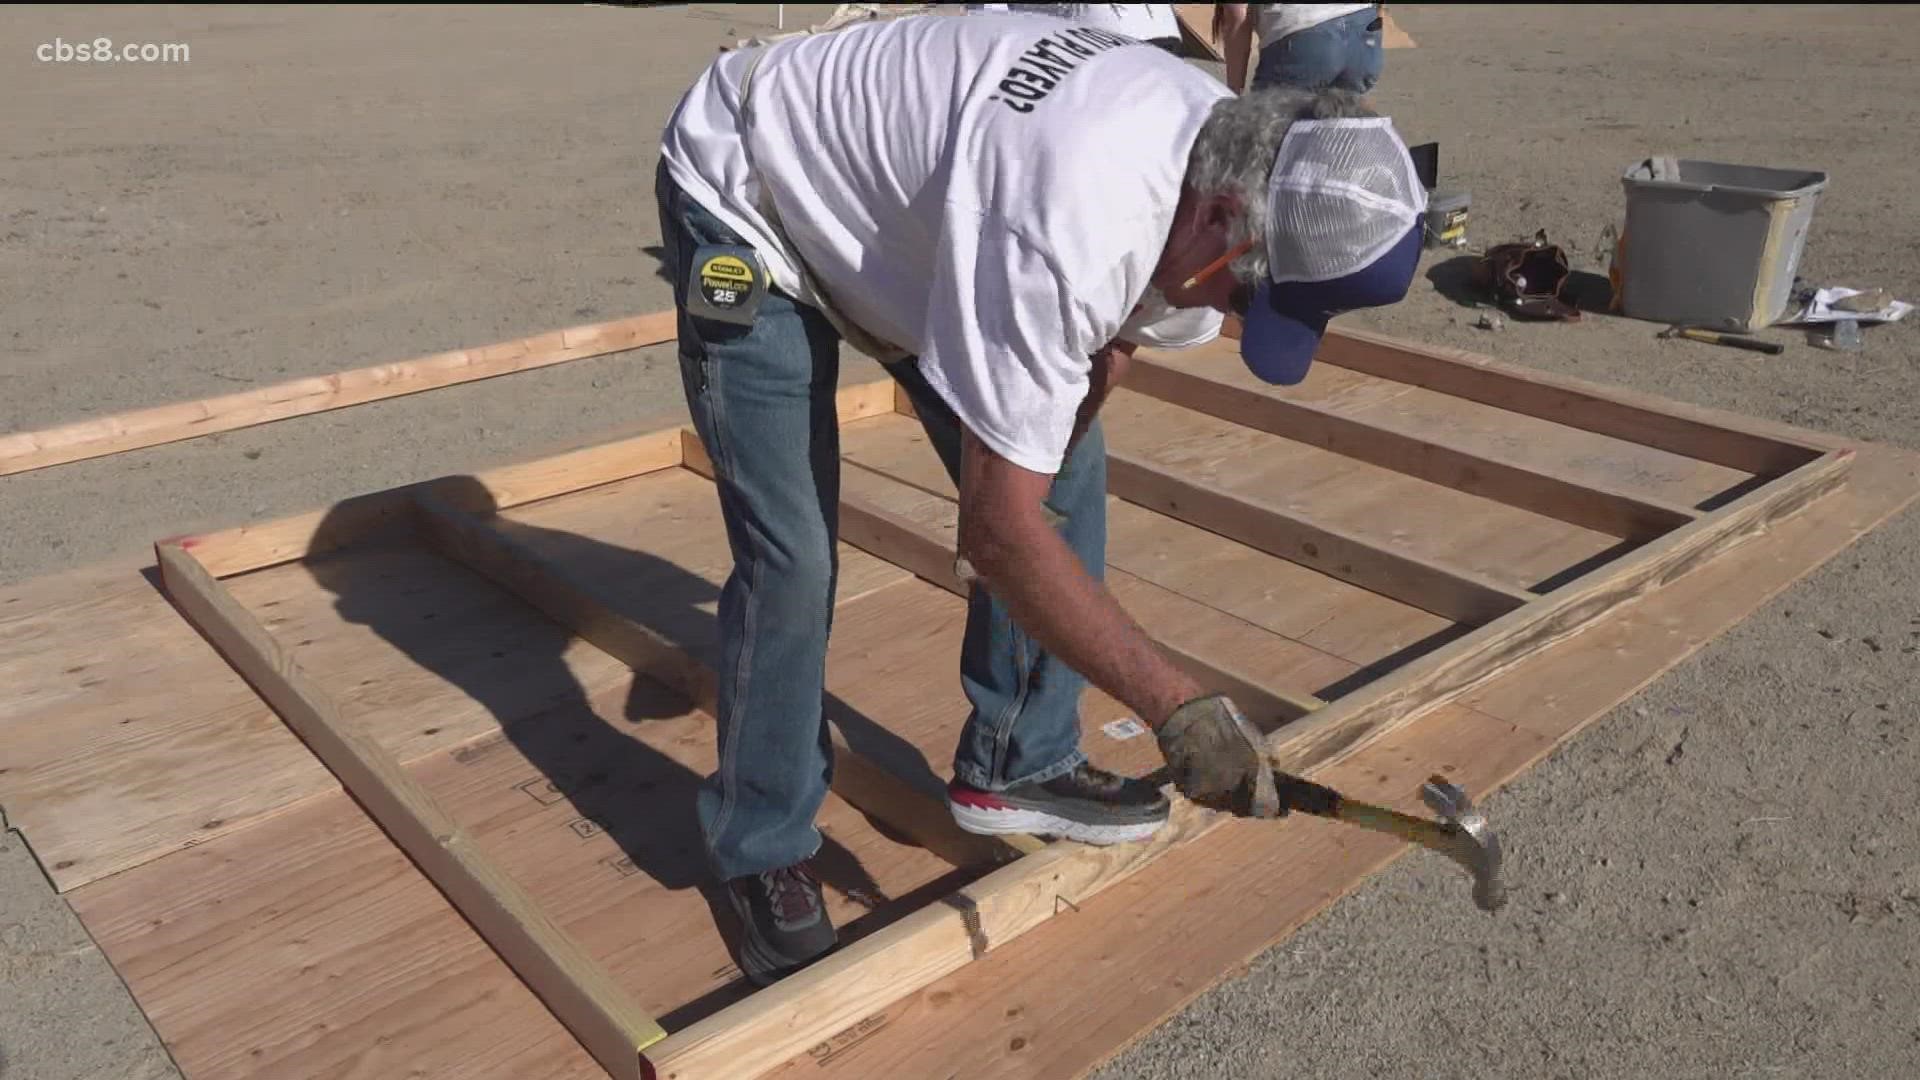 More than 120 volunteers from across the country gathered in Chula Vista to build six homes in one day for impoverished families in Tijuana.